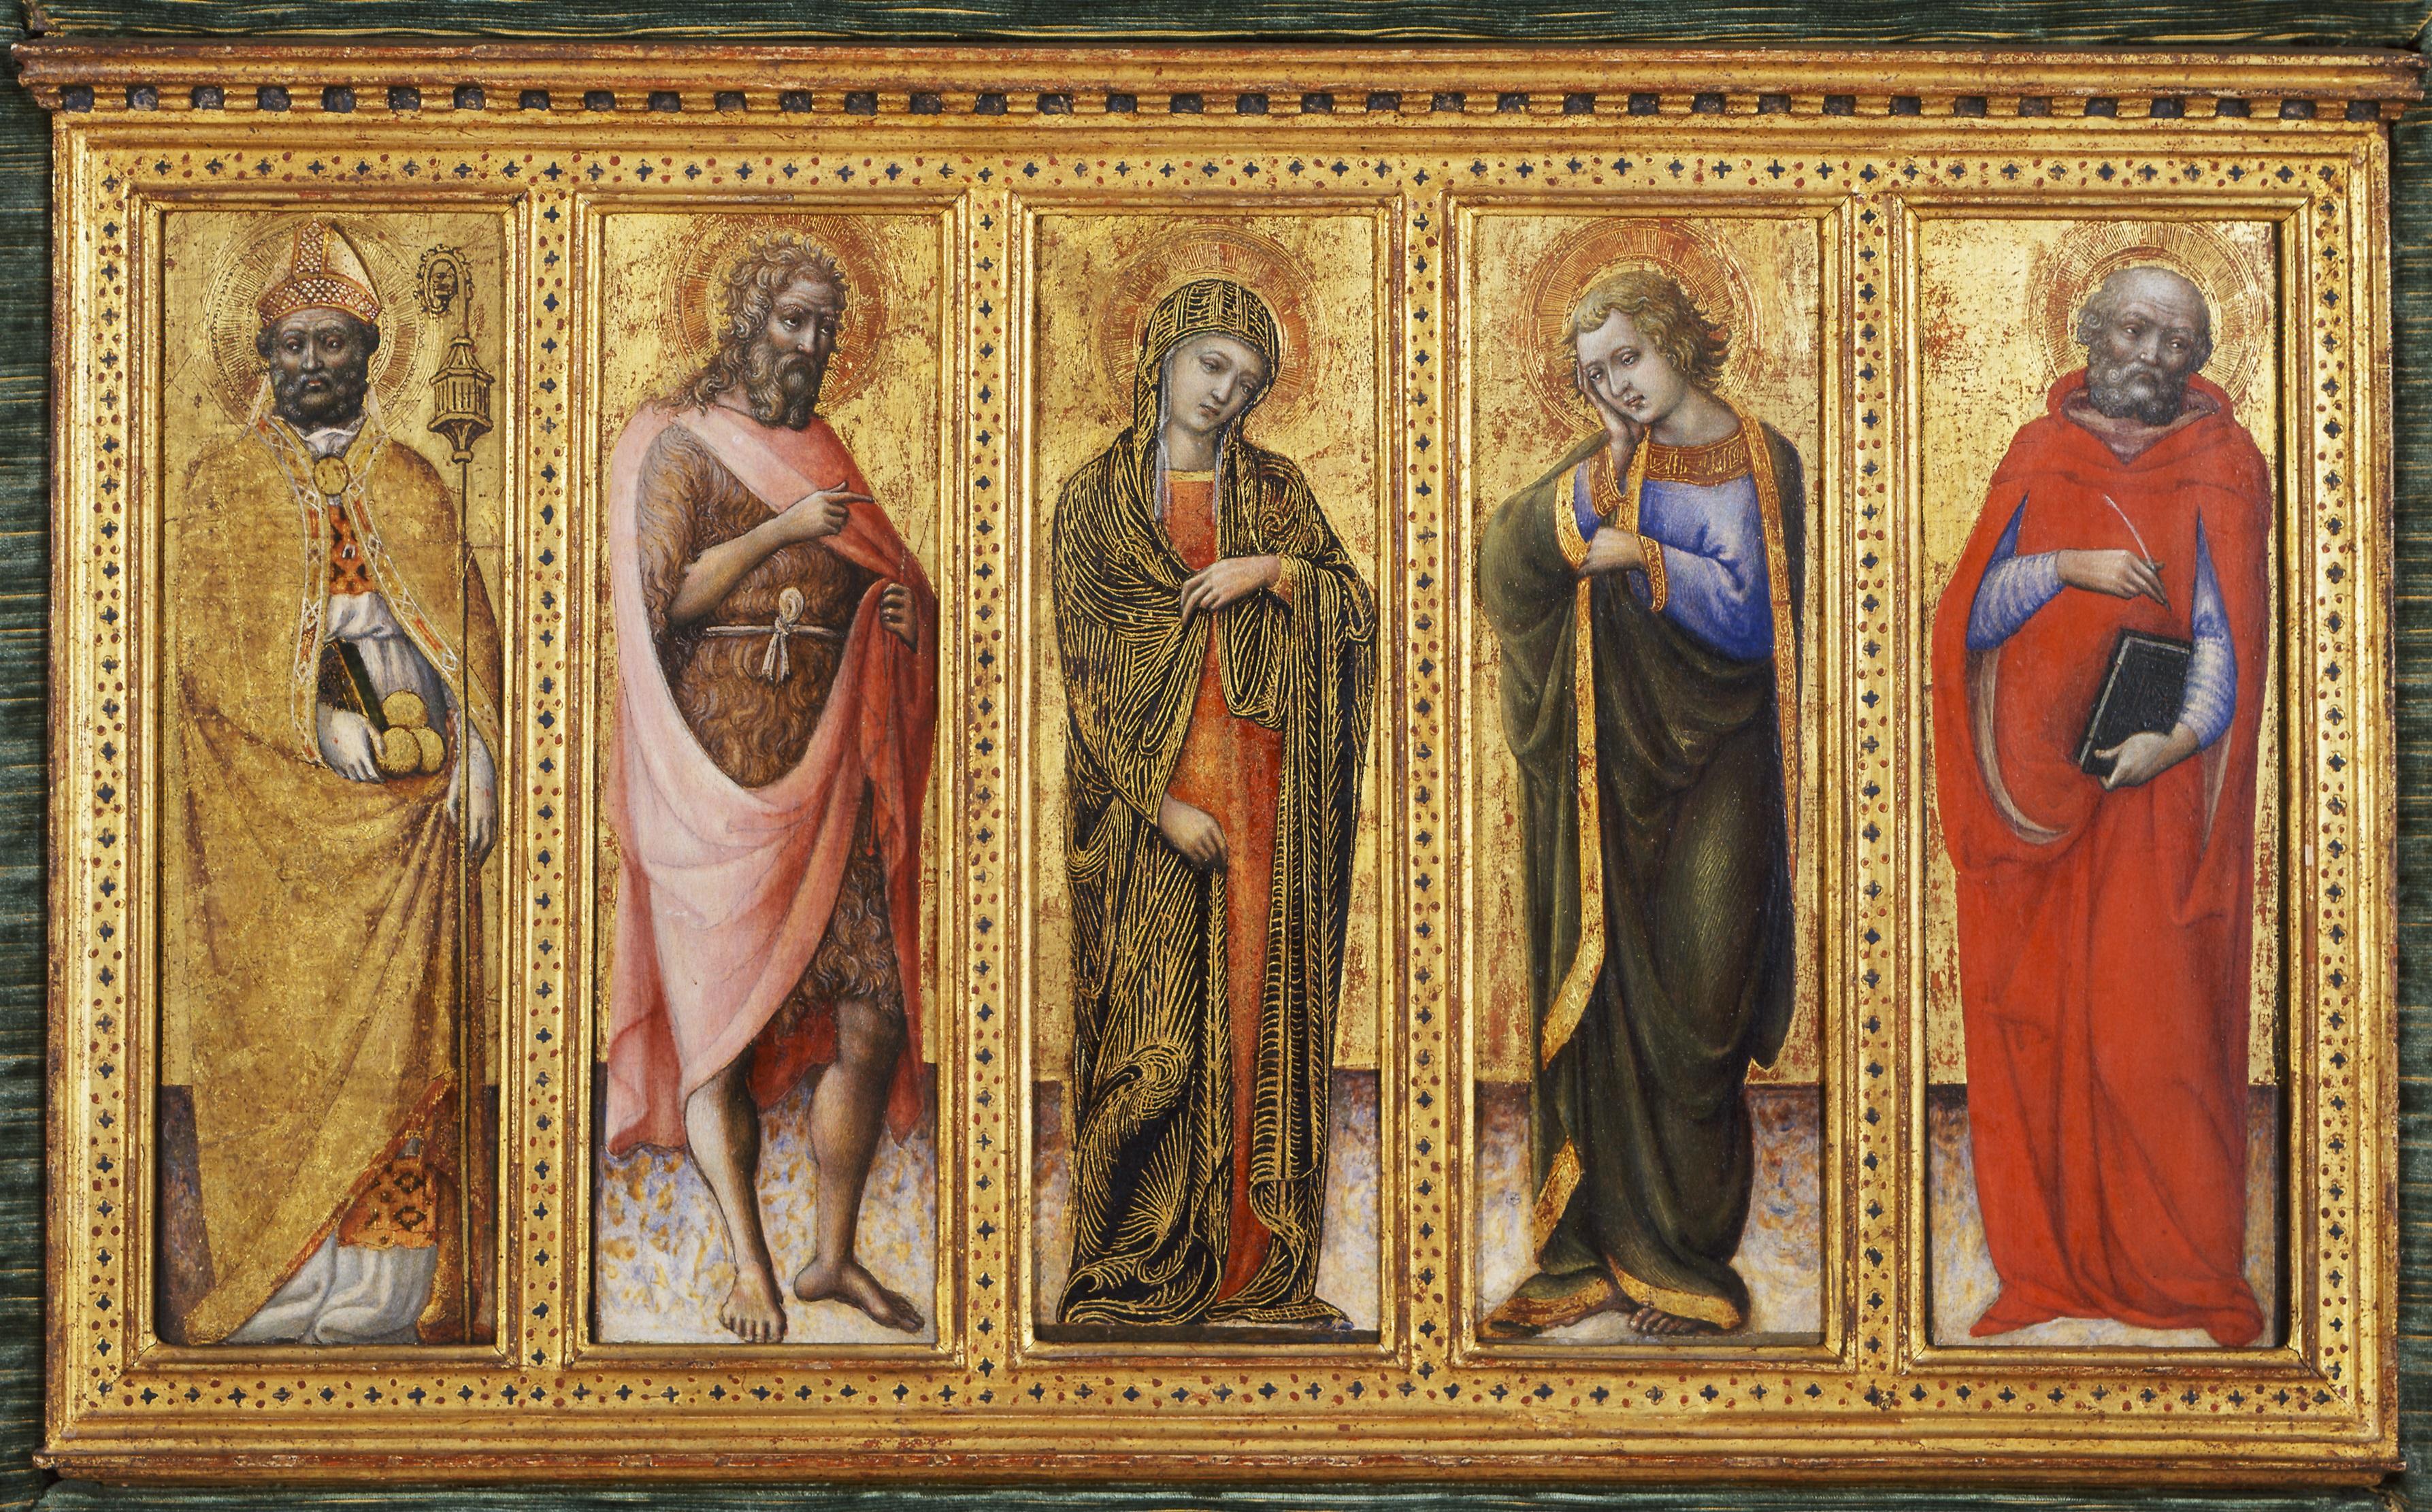 Tempera painting called The Virgin and Four Saints, circa 1450. From a Venetian workshop, possibly that of Michele Giambono.